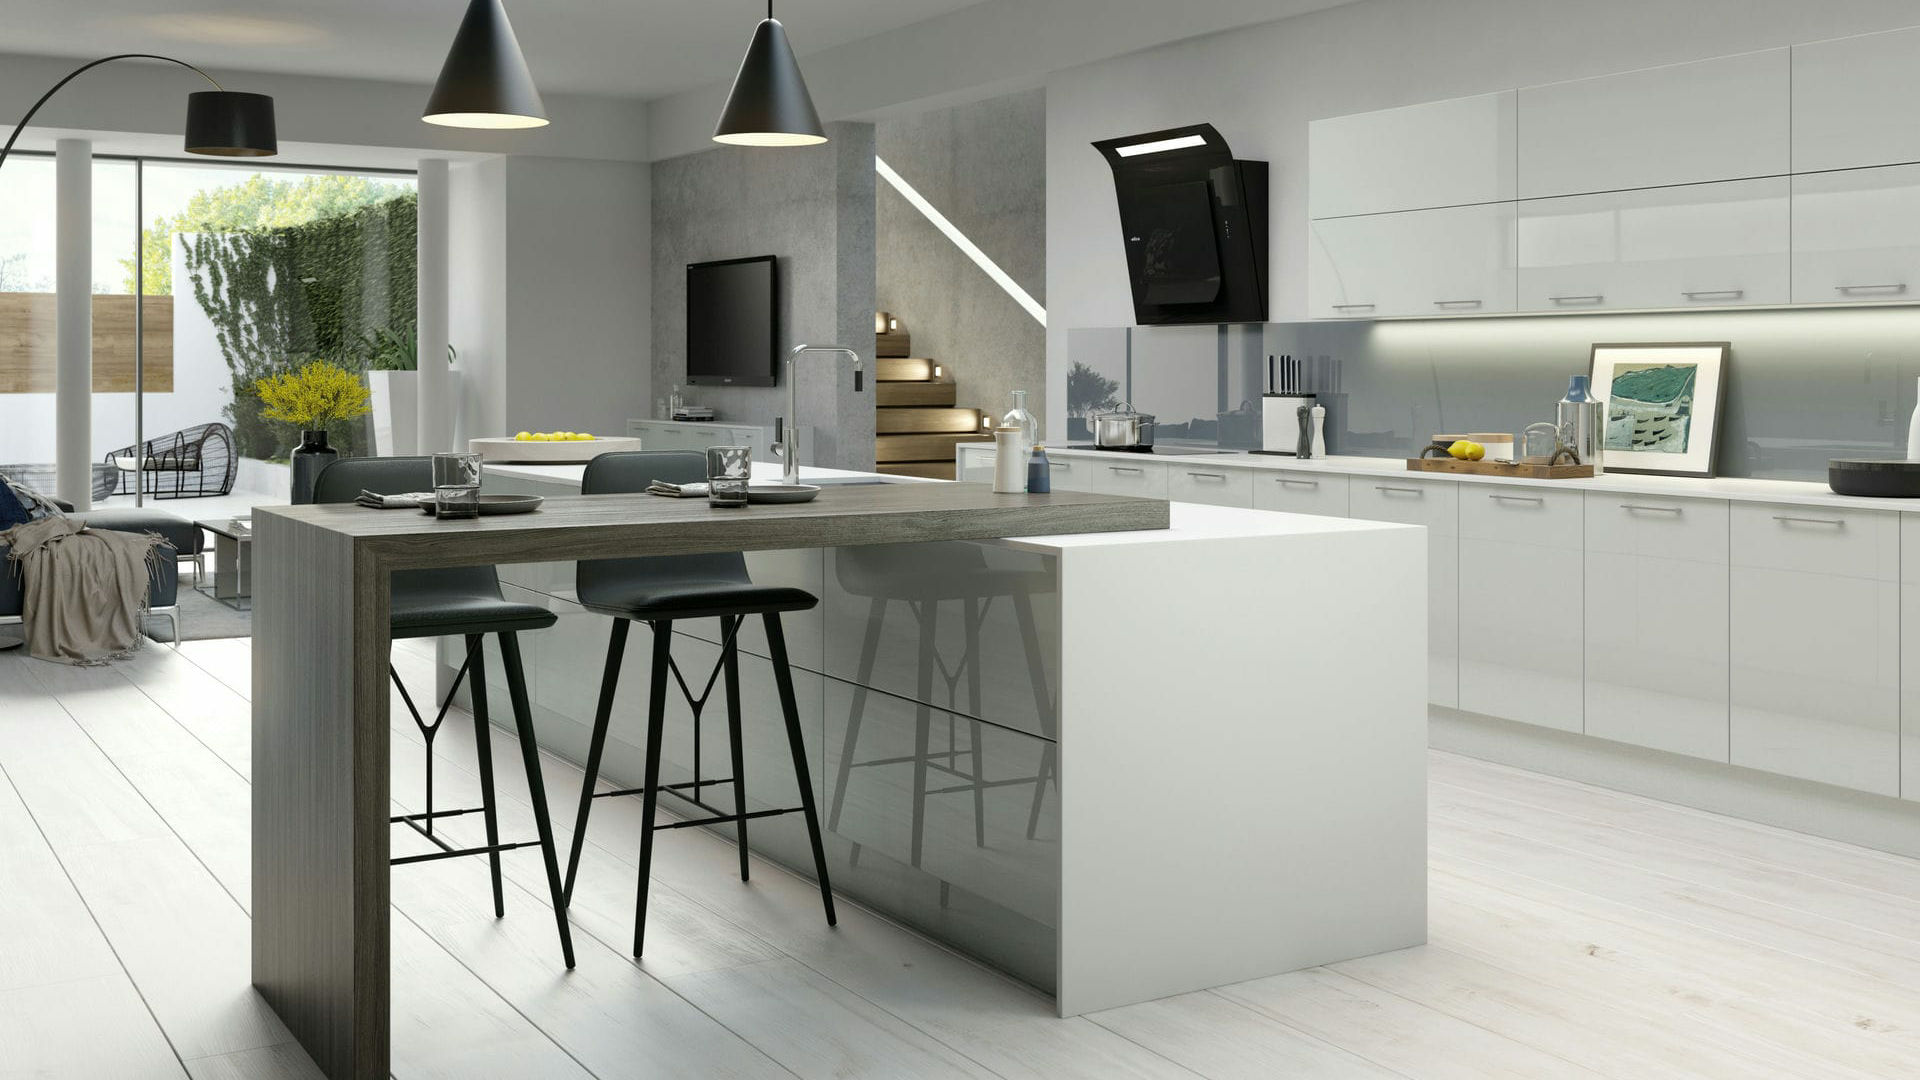 High gloss light grey kitchens reflecting a sleek, modern look with a lustrous finish